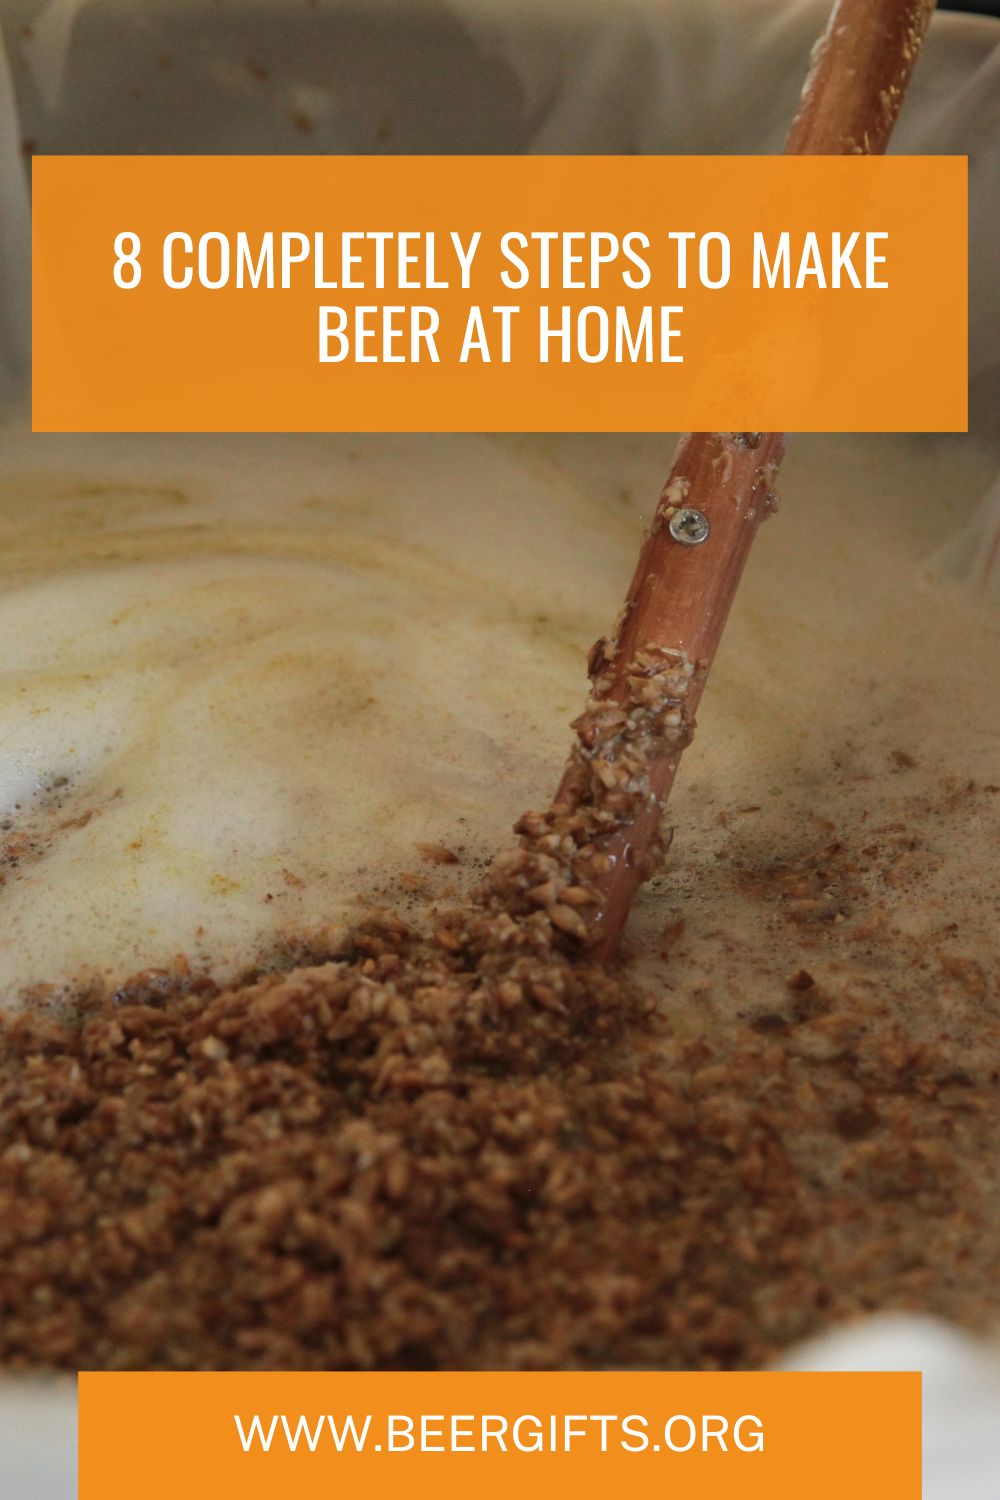 8 Completely Steps to Make Beer at Home1